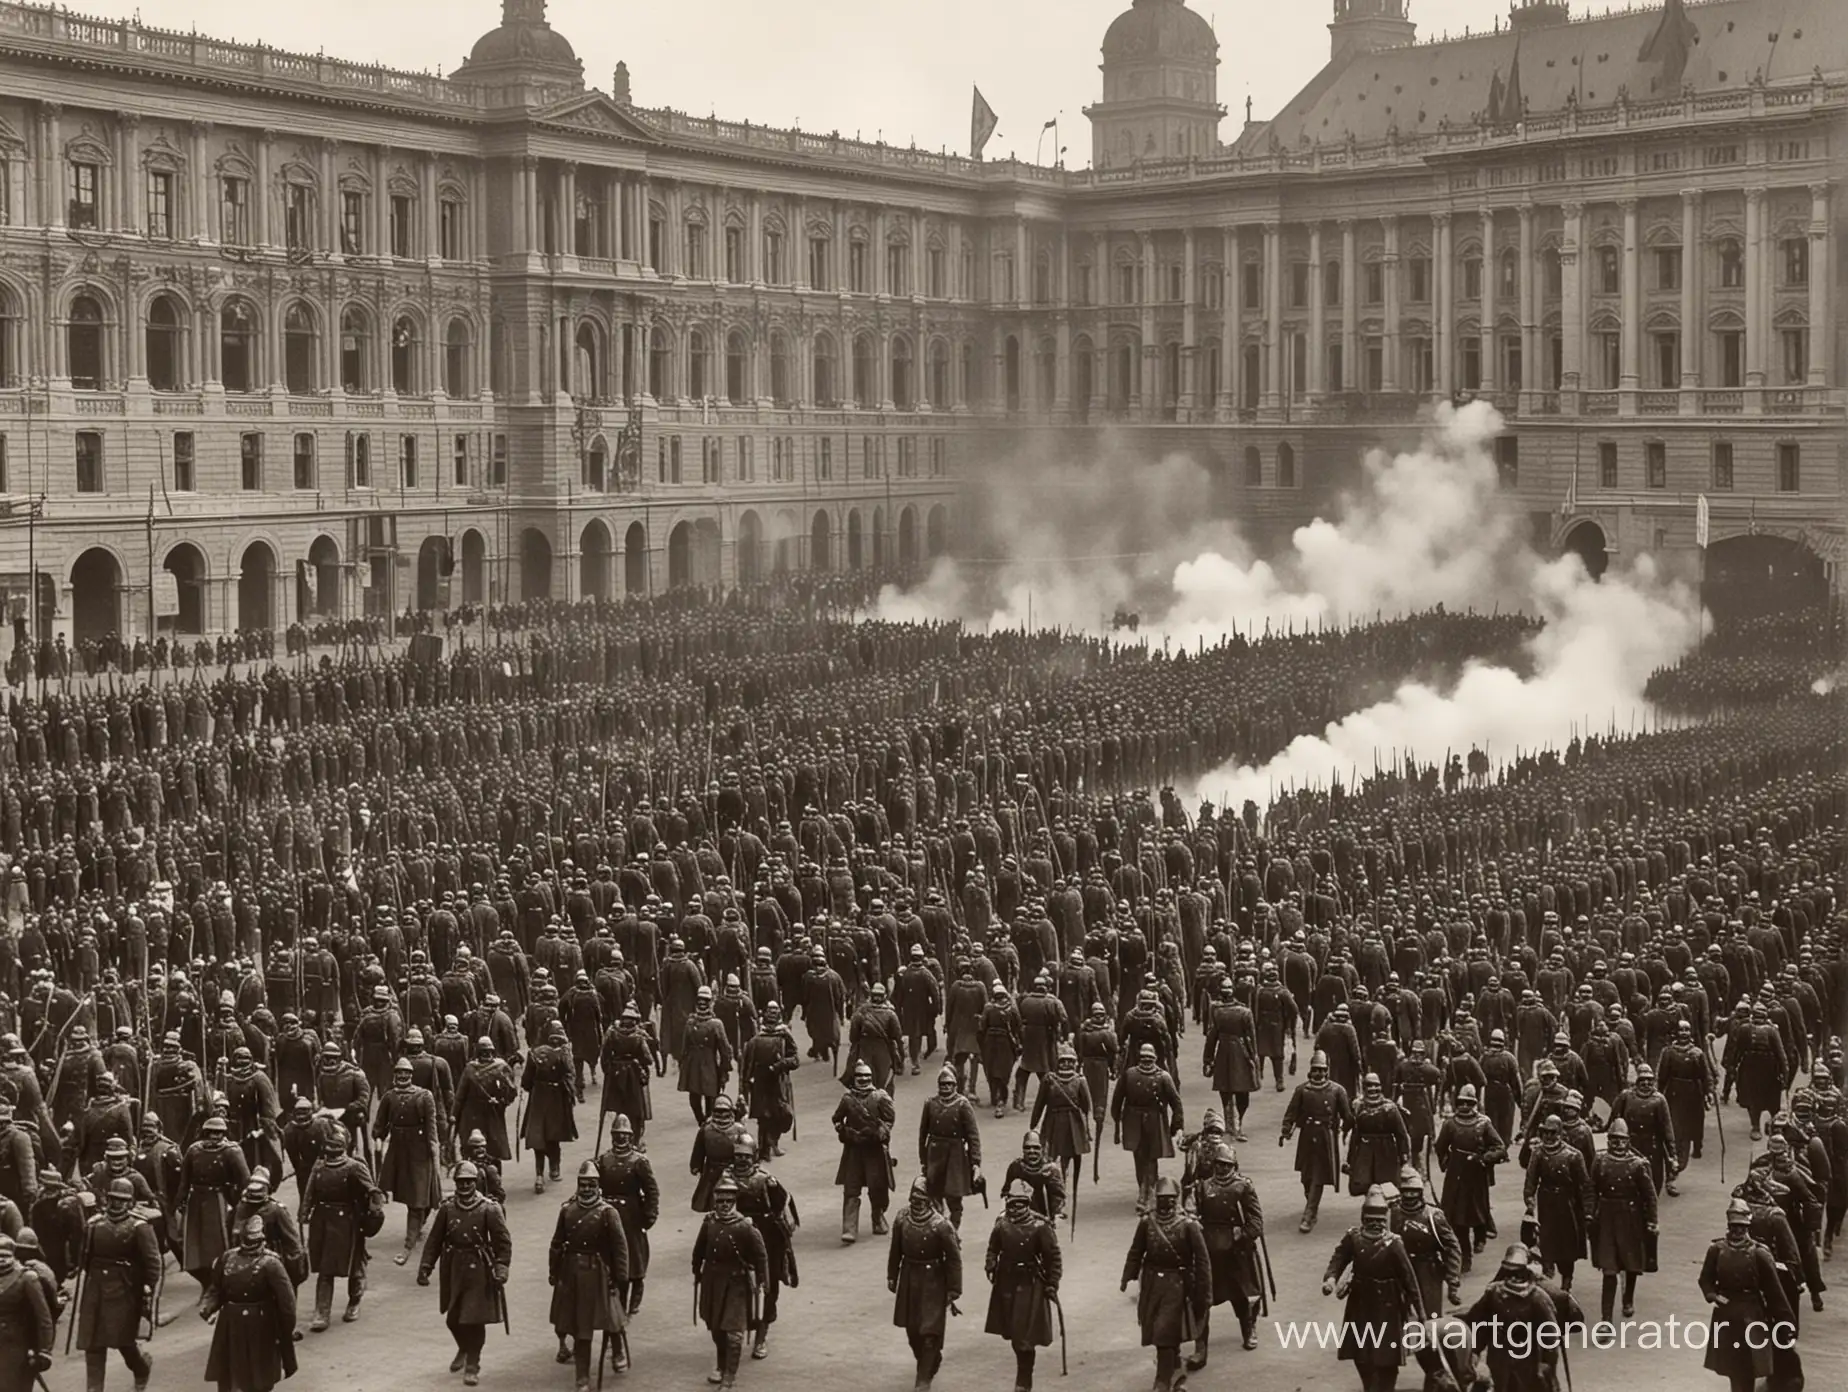 Imperial-Army-Storms-Parliament-Historical-Photo-from-1900